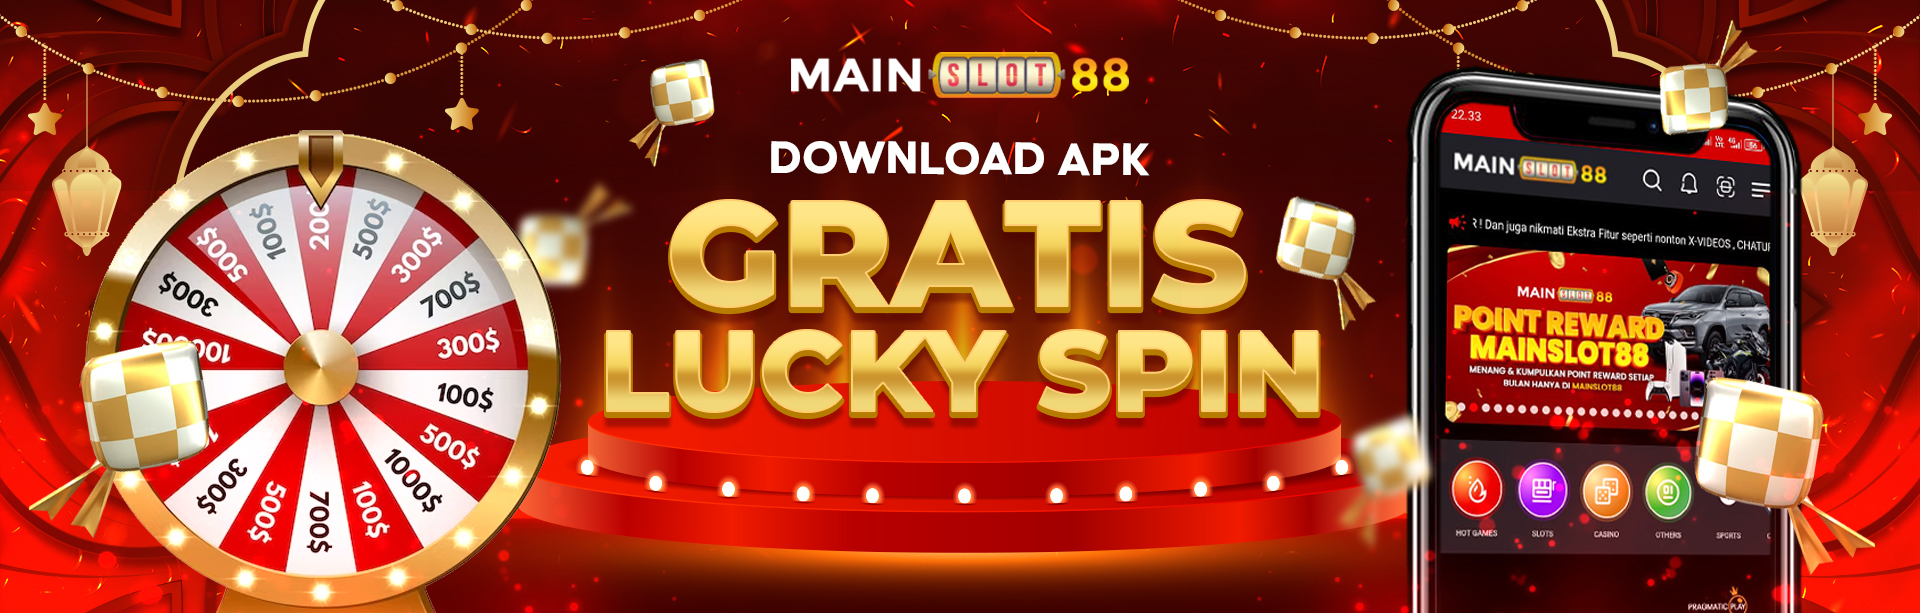 EVENT LUCKY SPIN